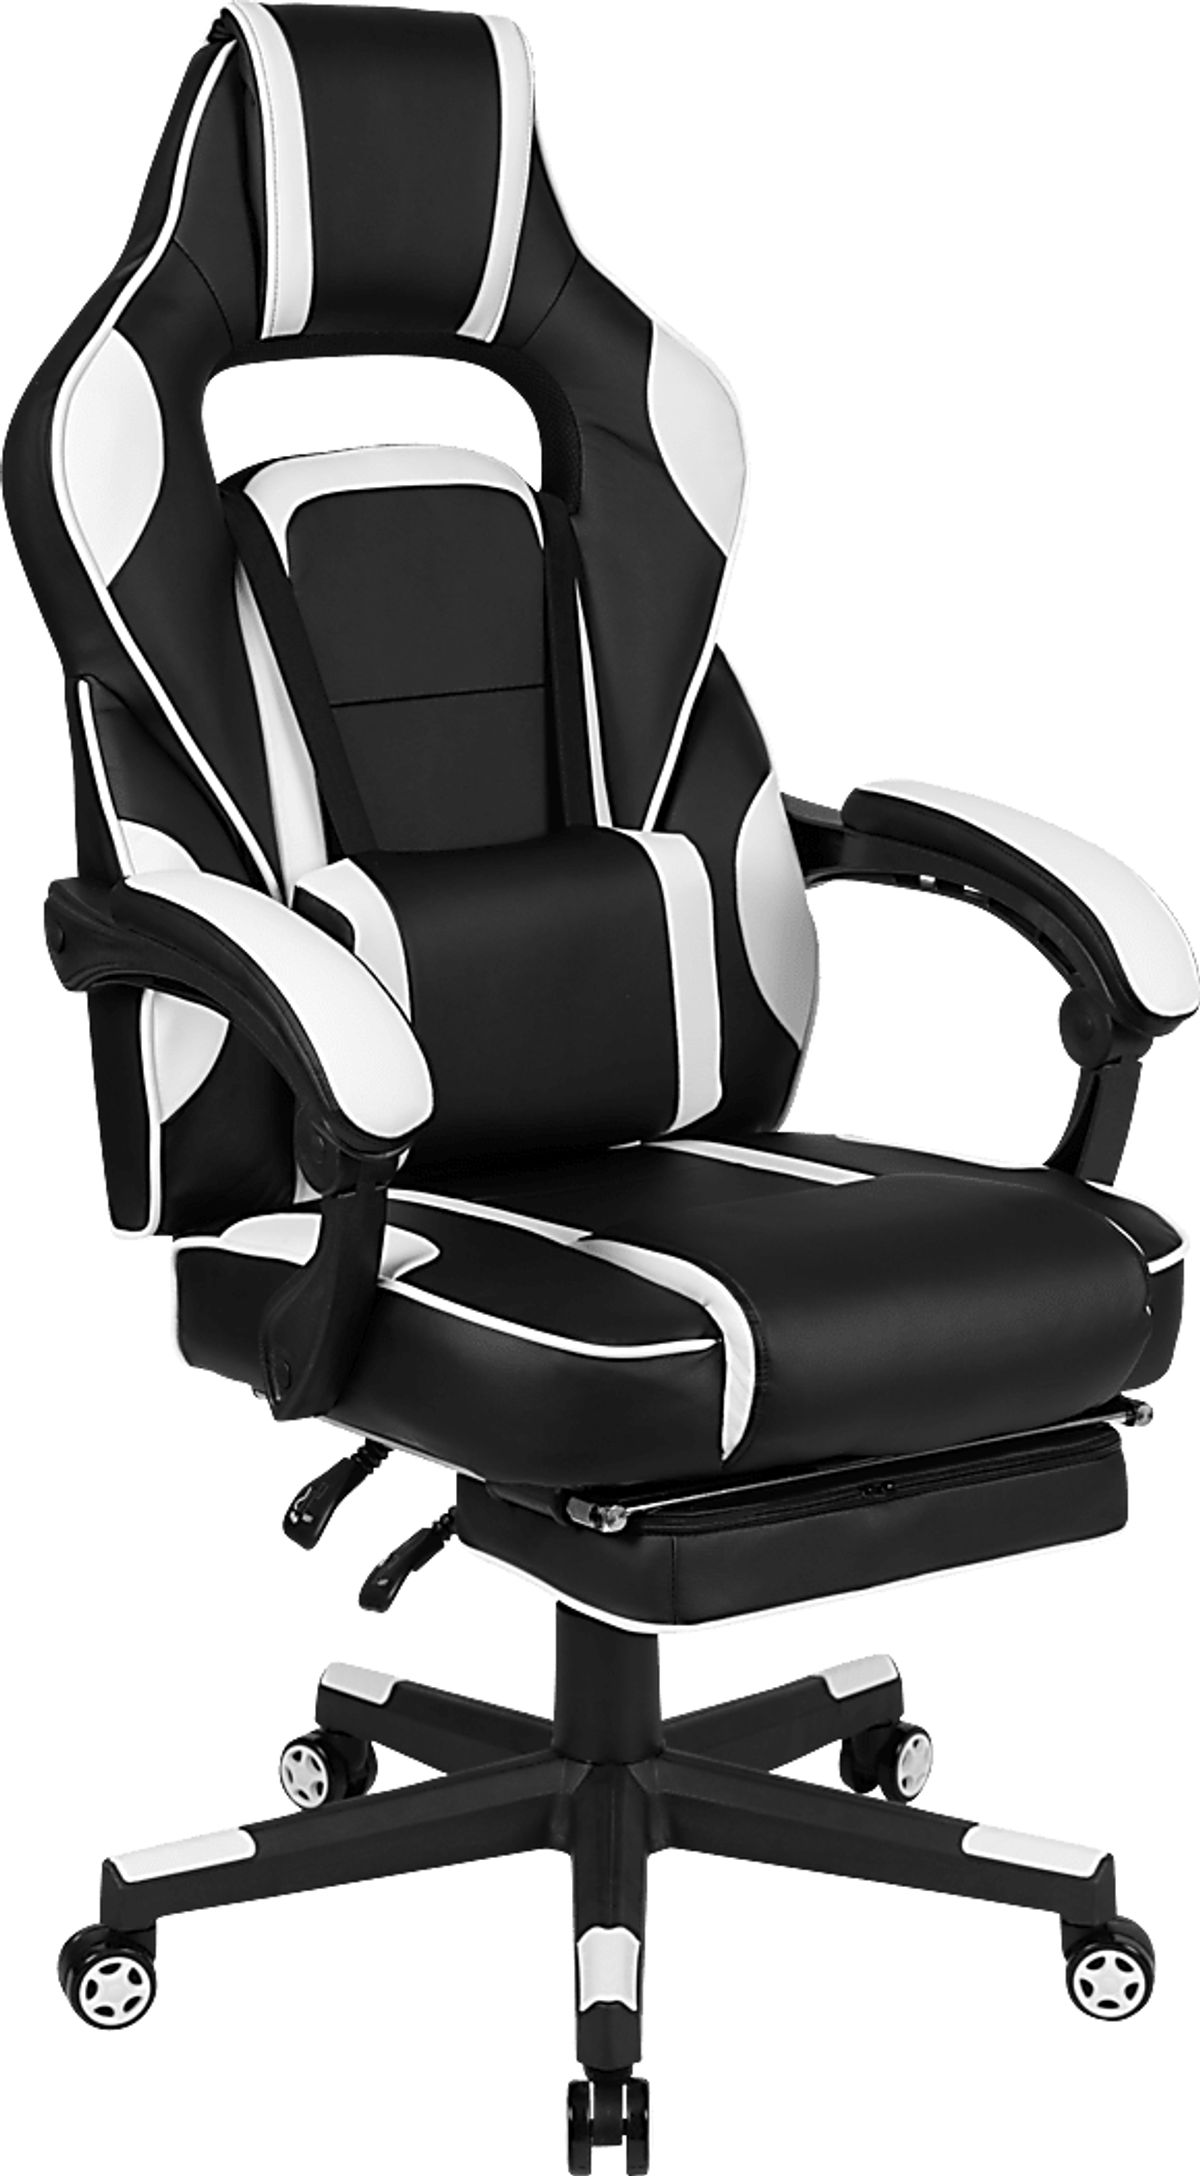 https://assets.roomstogo.com/product/kids-exfor-white-gaming-chair-with-footrest_38202898_image-item?cache-id=e0cd40cfdc2f9cc5eb3b1c70dad833a1&w=1200